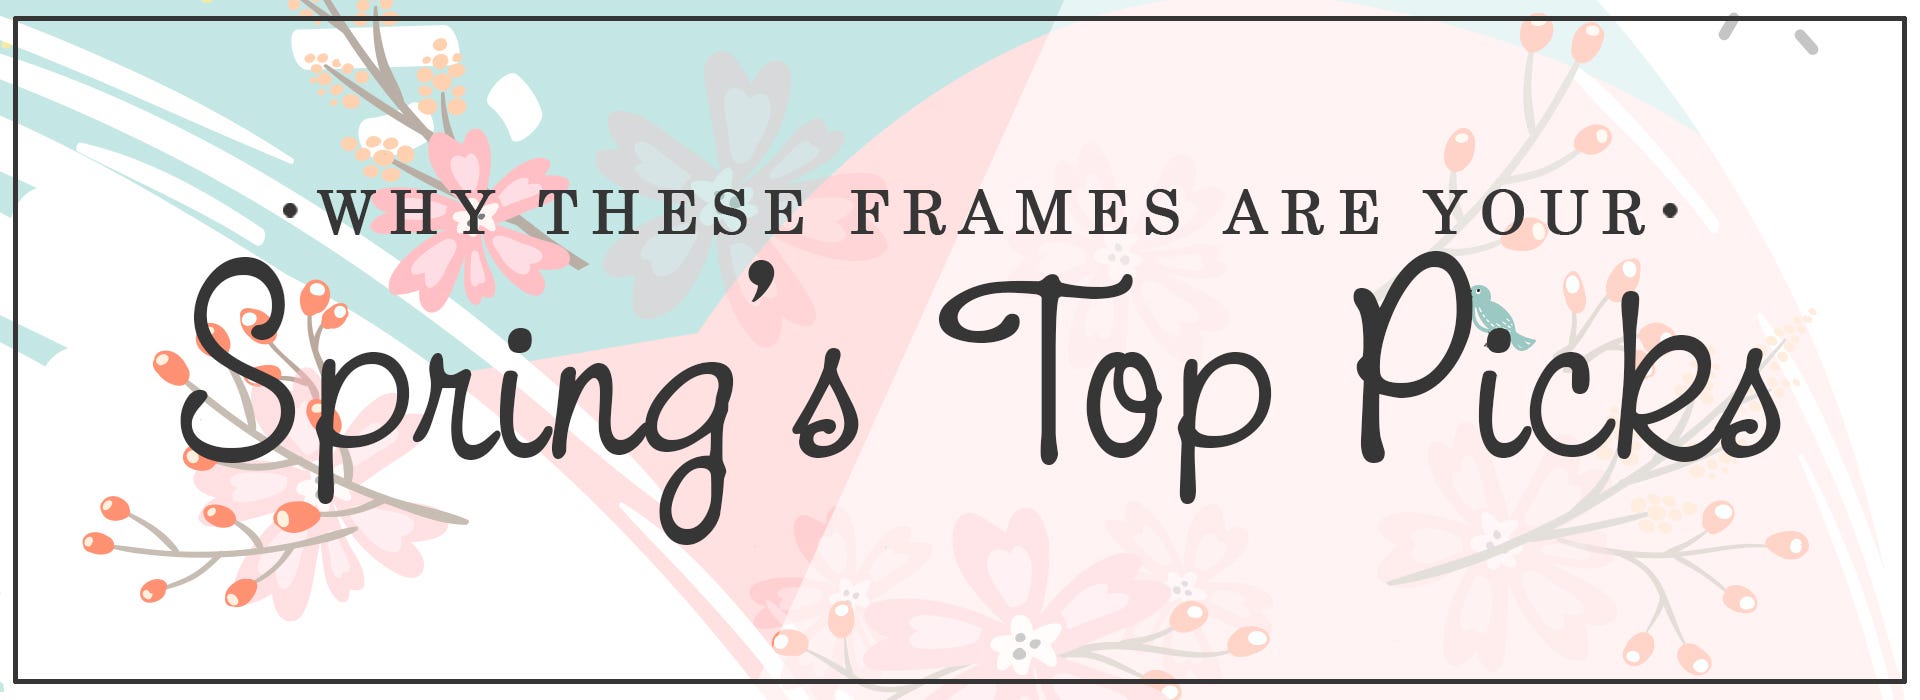 Why These Frames Are Your Spring's Top Picks